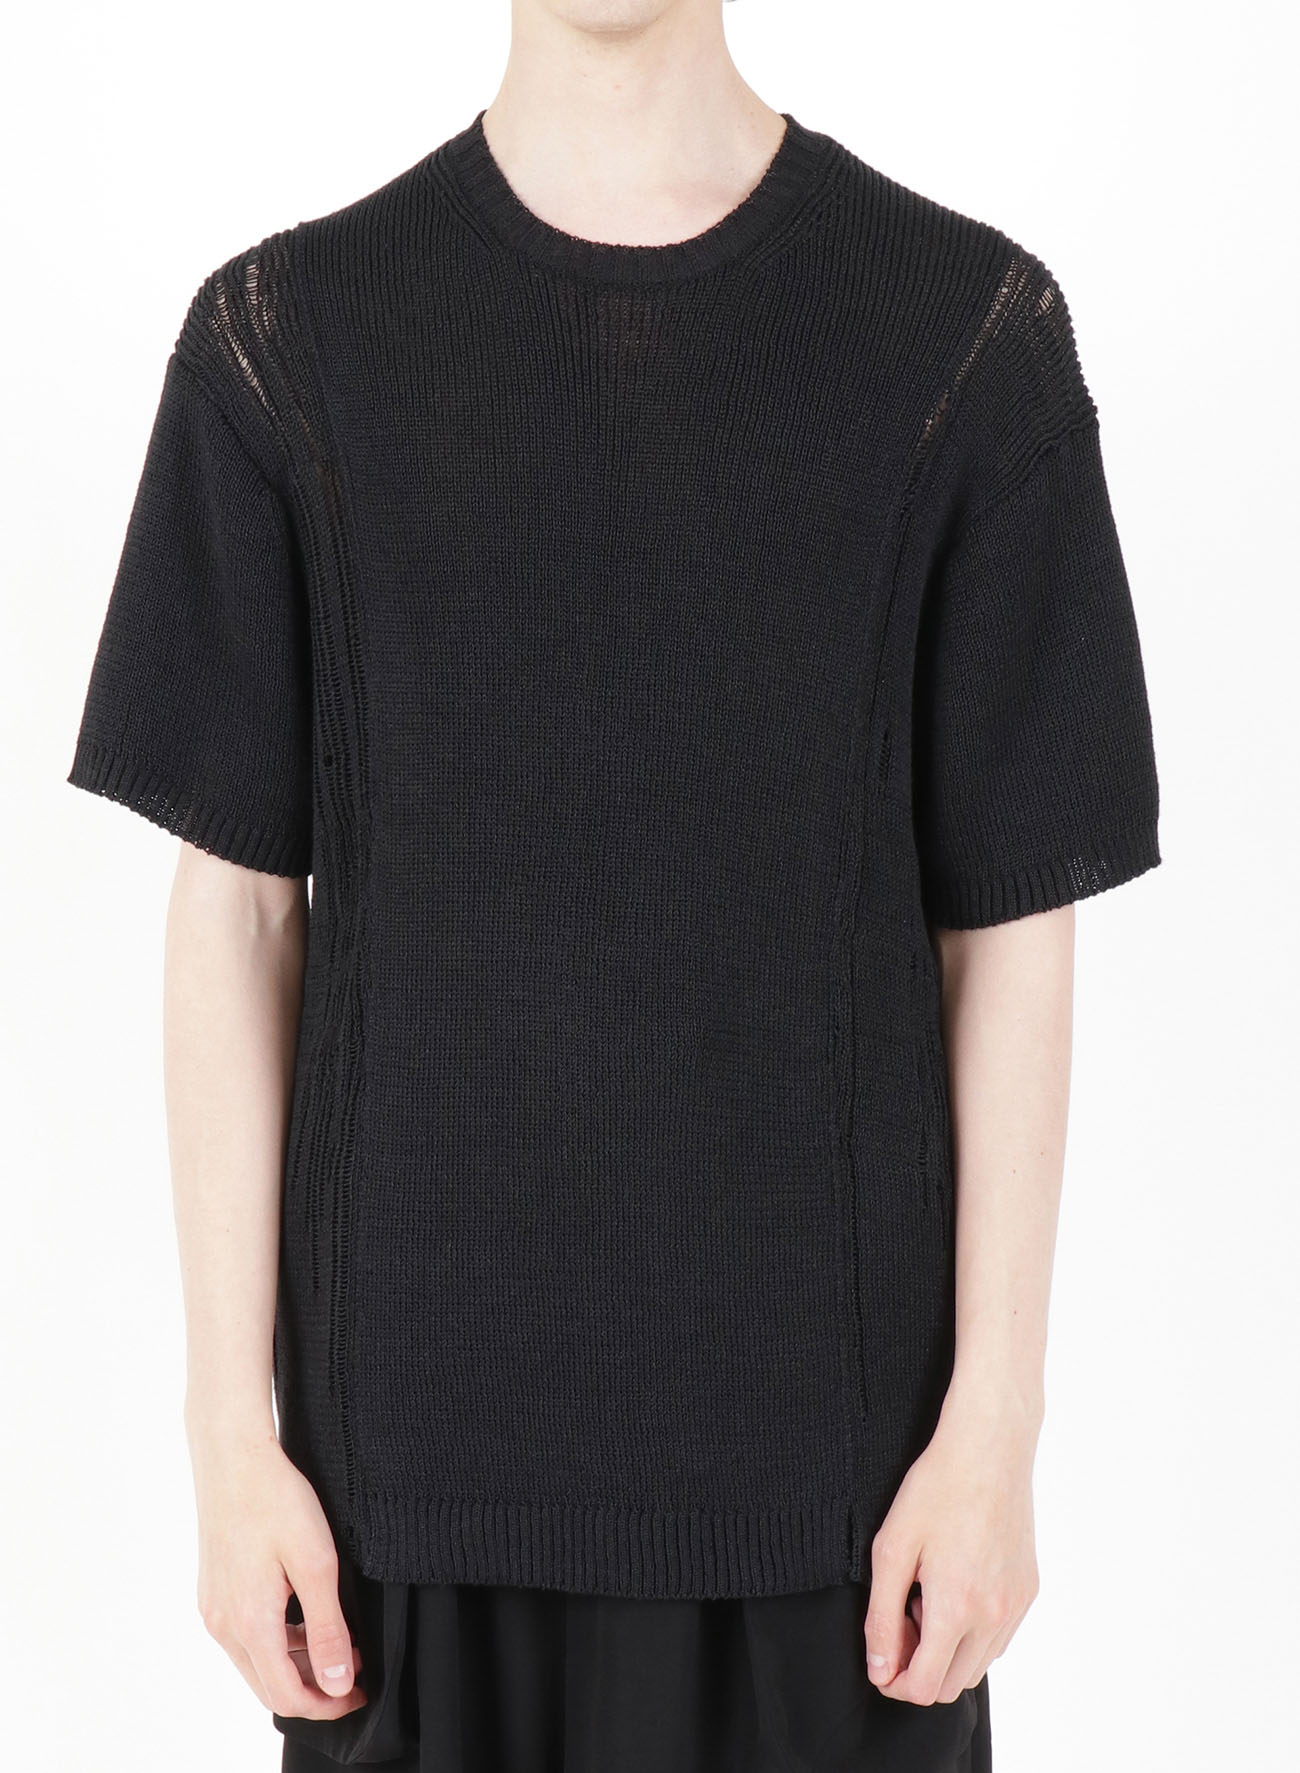 7G RIB + PRINT PATCHED ROUND NECK SHORT SLEEVES